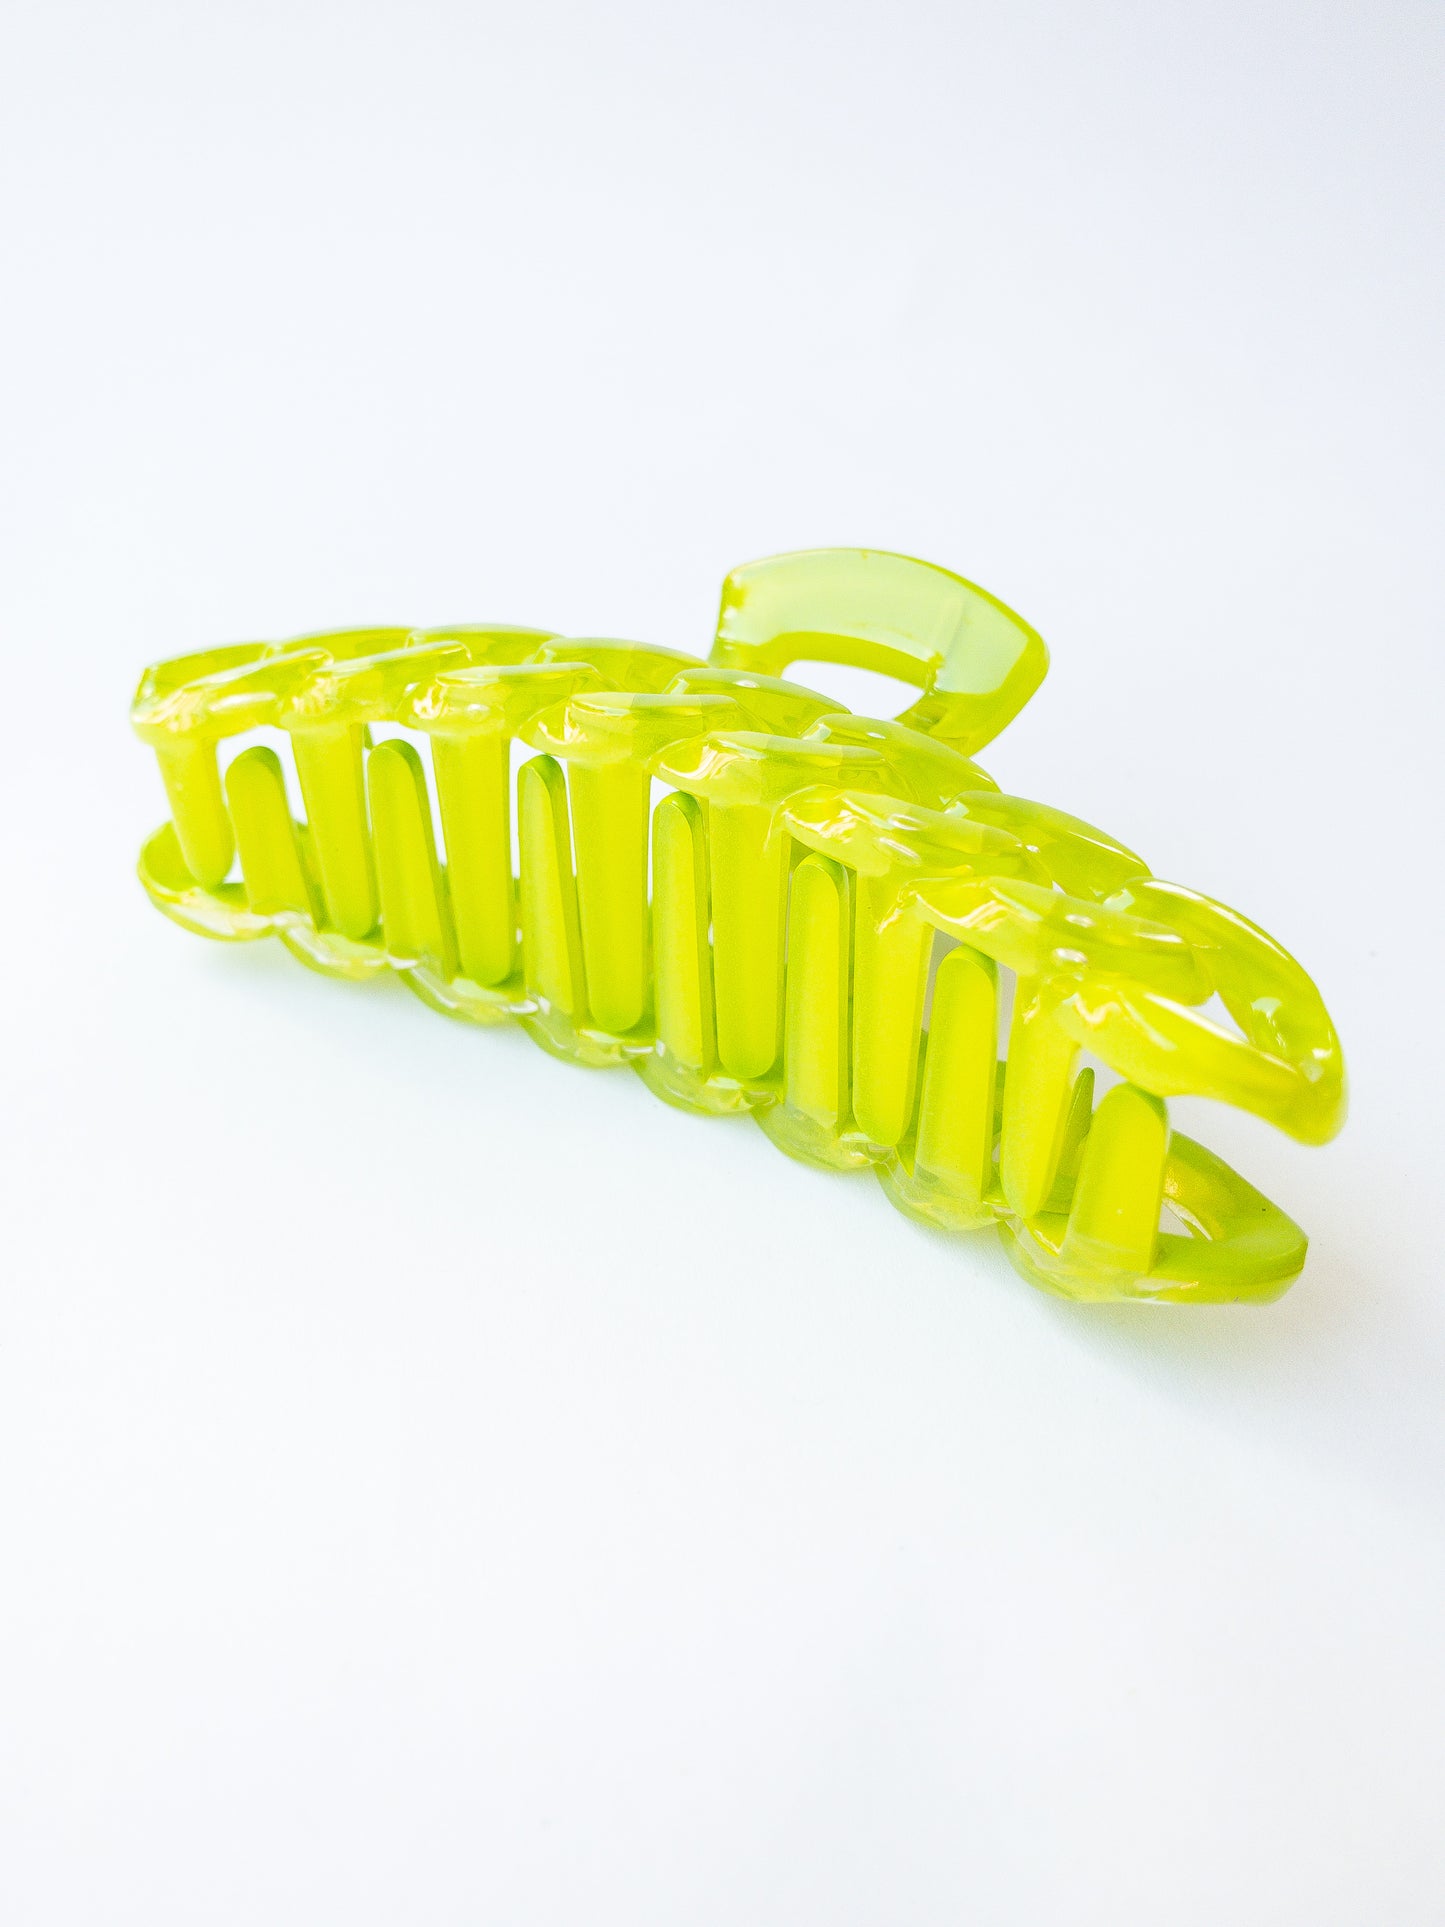 The brightest chain link hair claw clip in the most delectable candy hue! This green hair claw is large in size and strong enough to sweep up your hair in a messy updo. You're going to want one in every color!